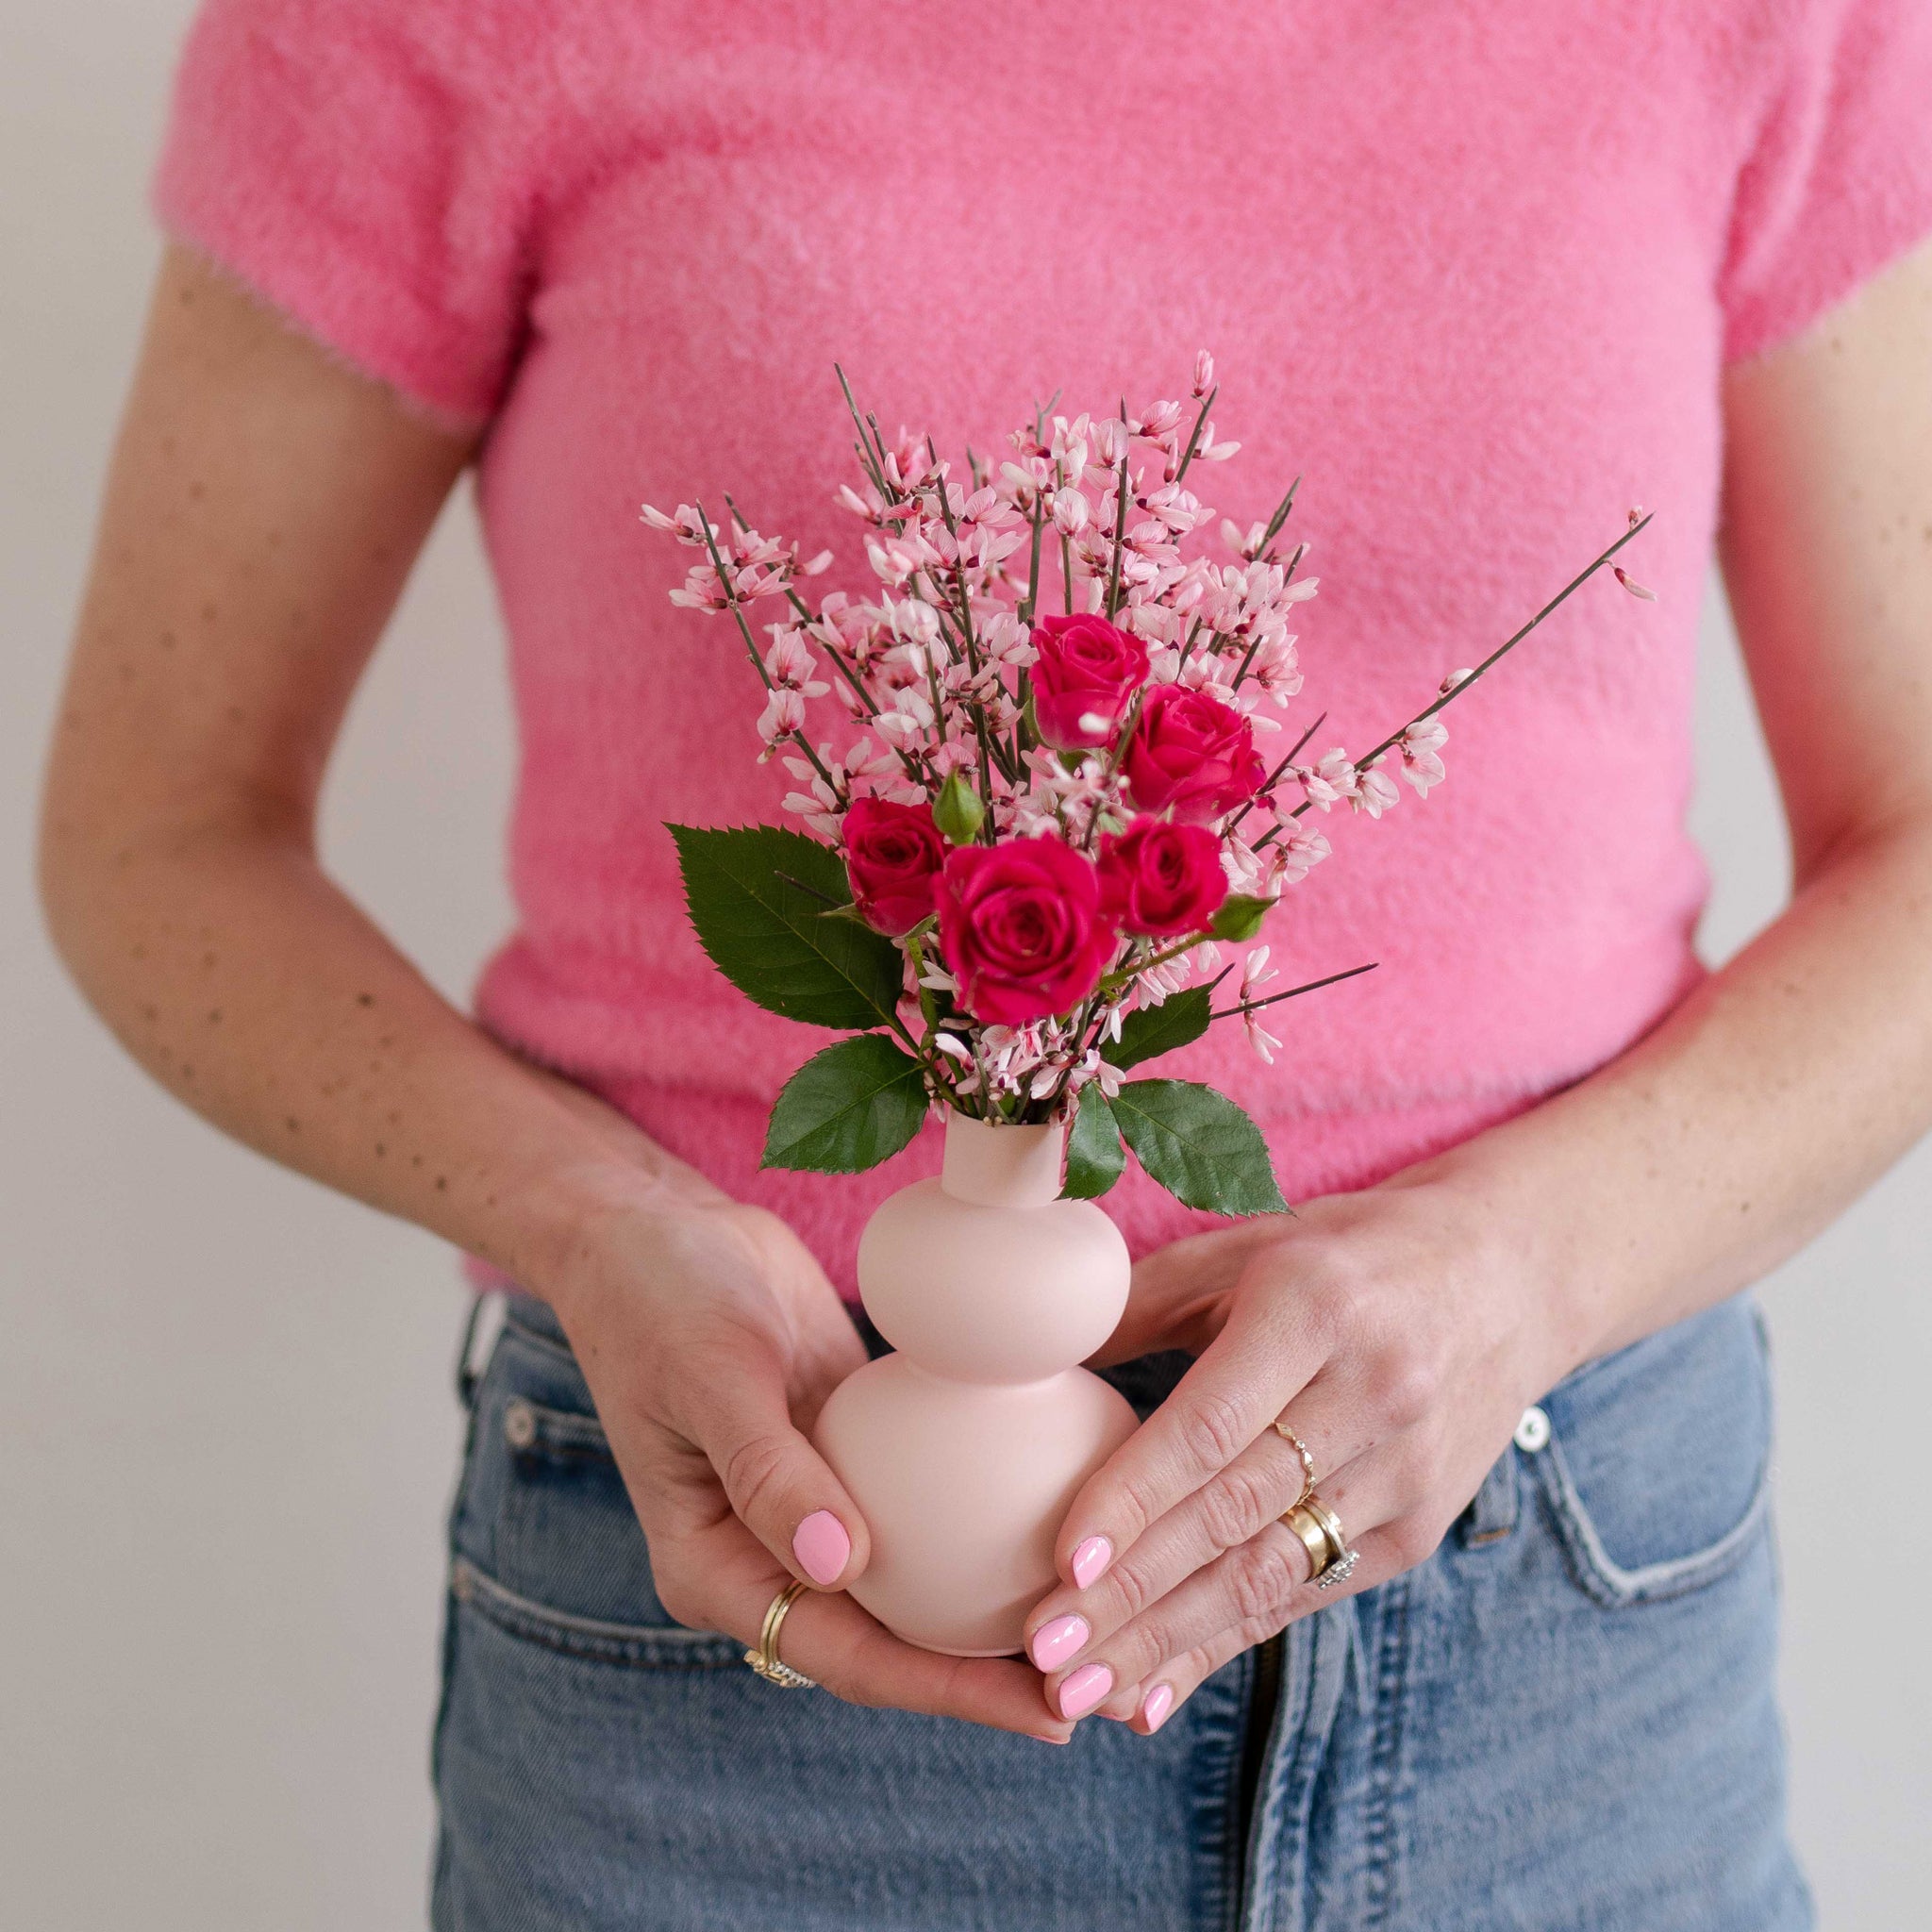 Woman holding a small pink Valentine's Day flower arrangement